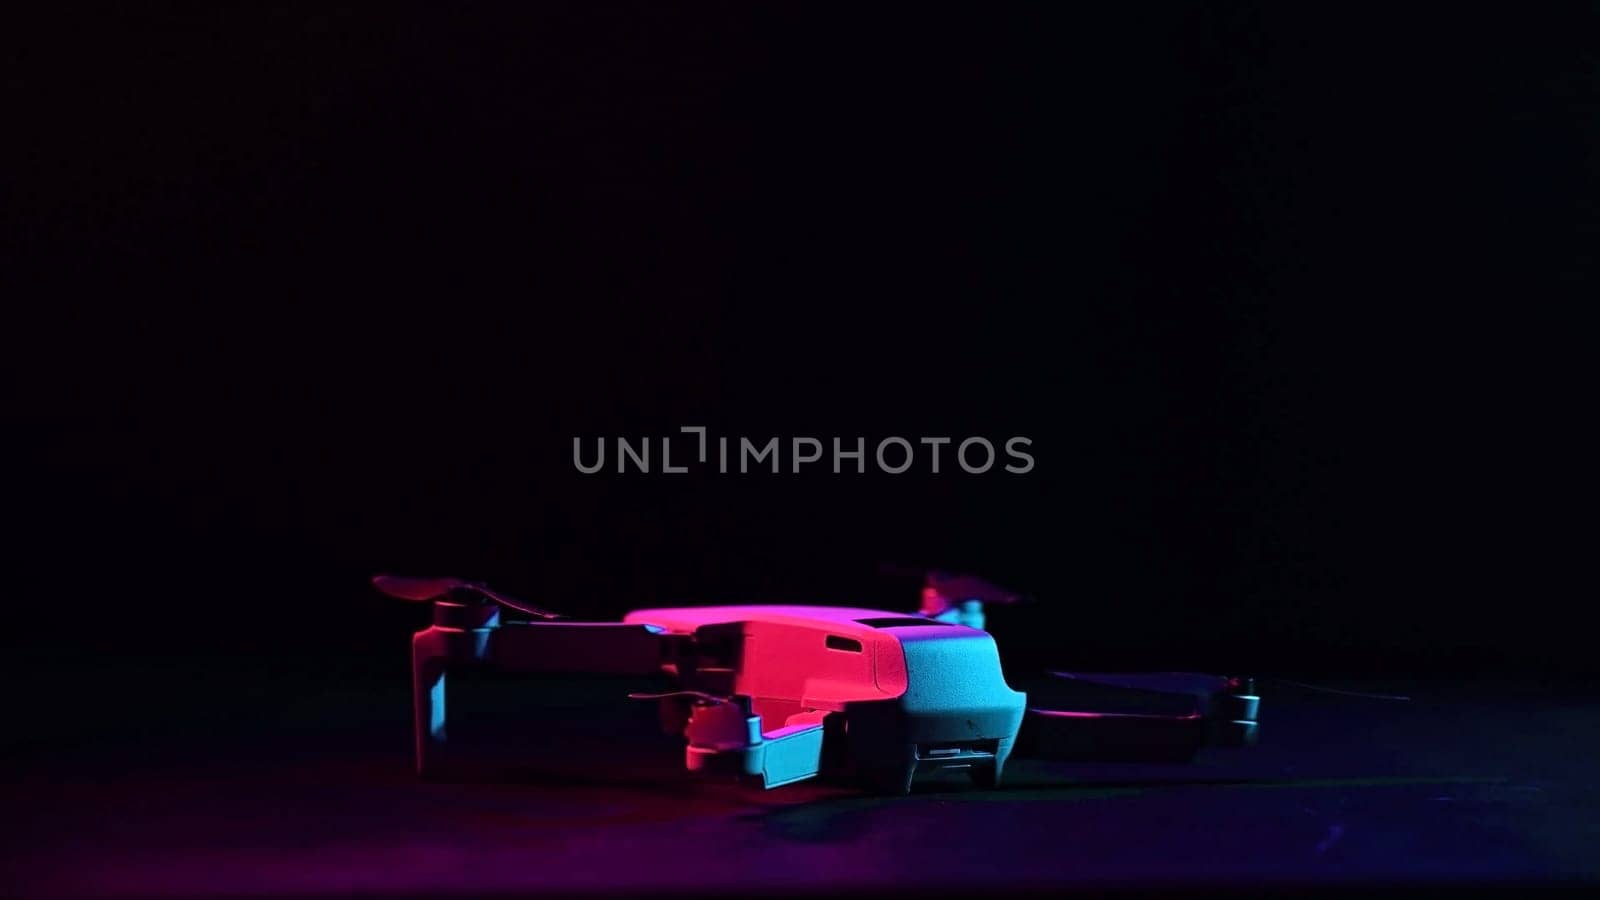 Quadrocopter in clouds of colored pink-blue smoke on a black background